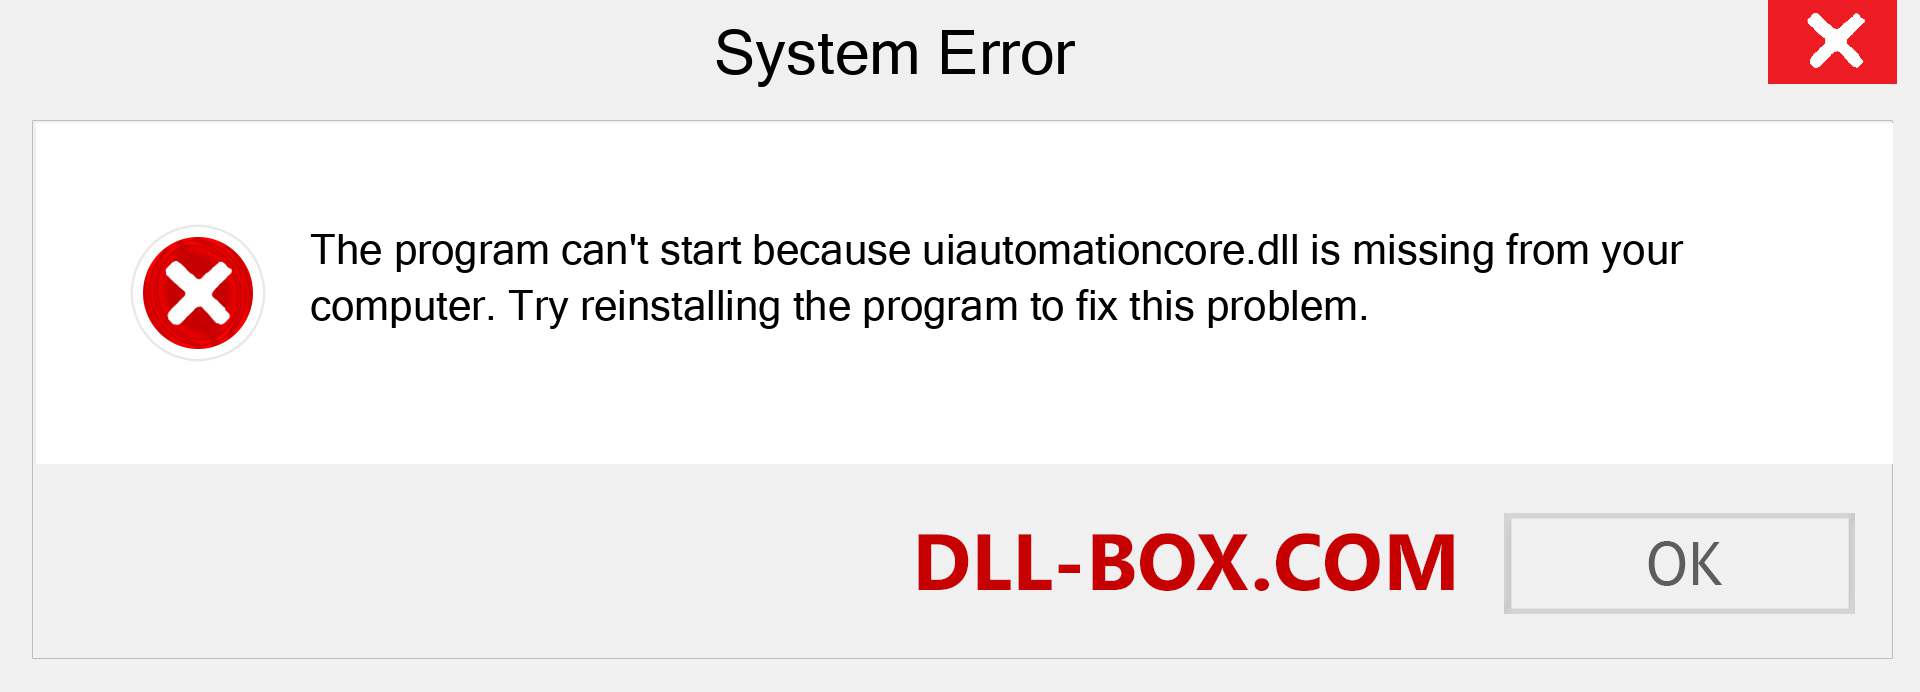  uiautomationcore.dll file is missing?. Download for Windows 7, 8, 10 - Fix  uiautomationcore dll Missing Error on Windows, photos, images